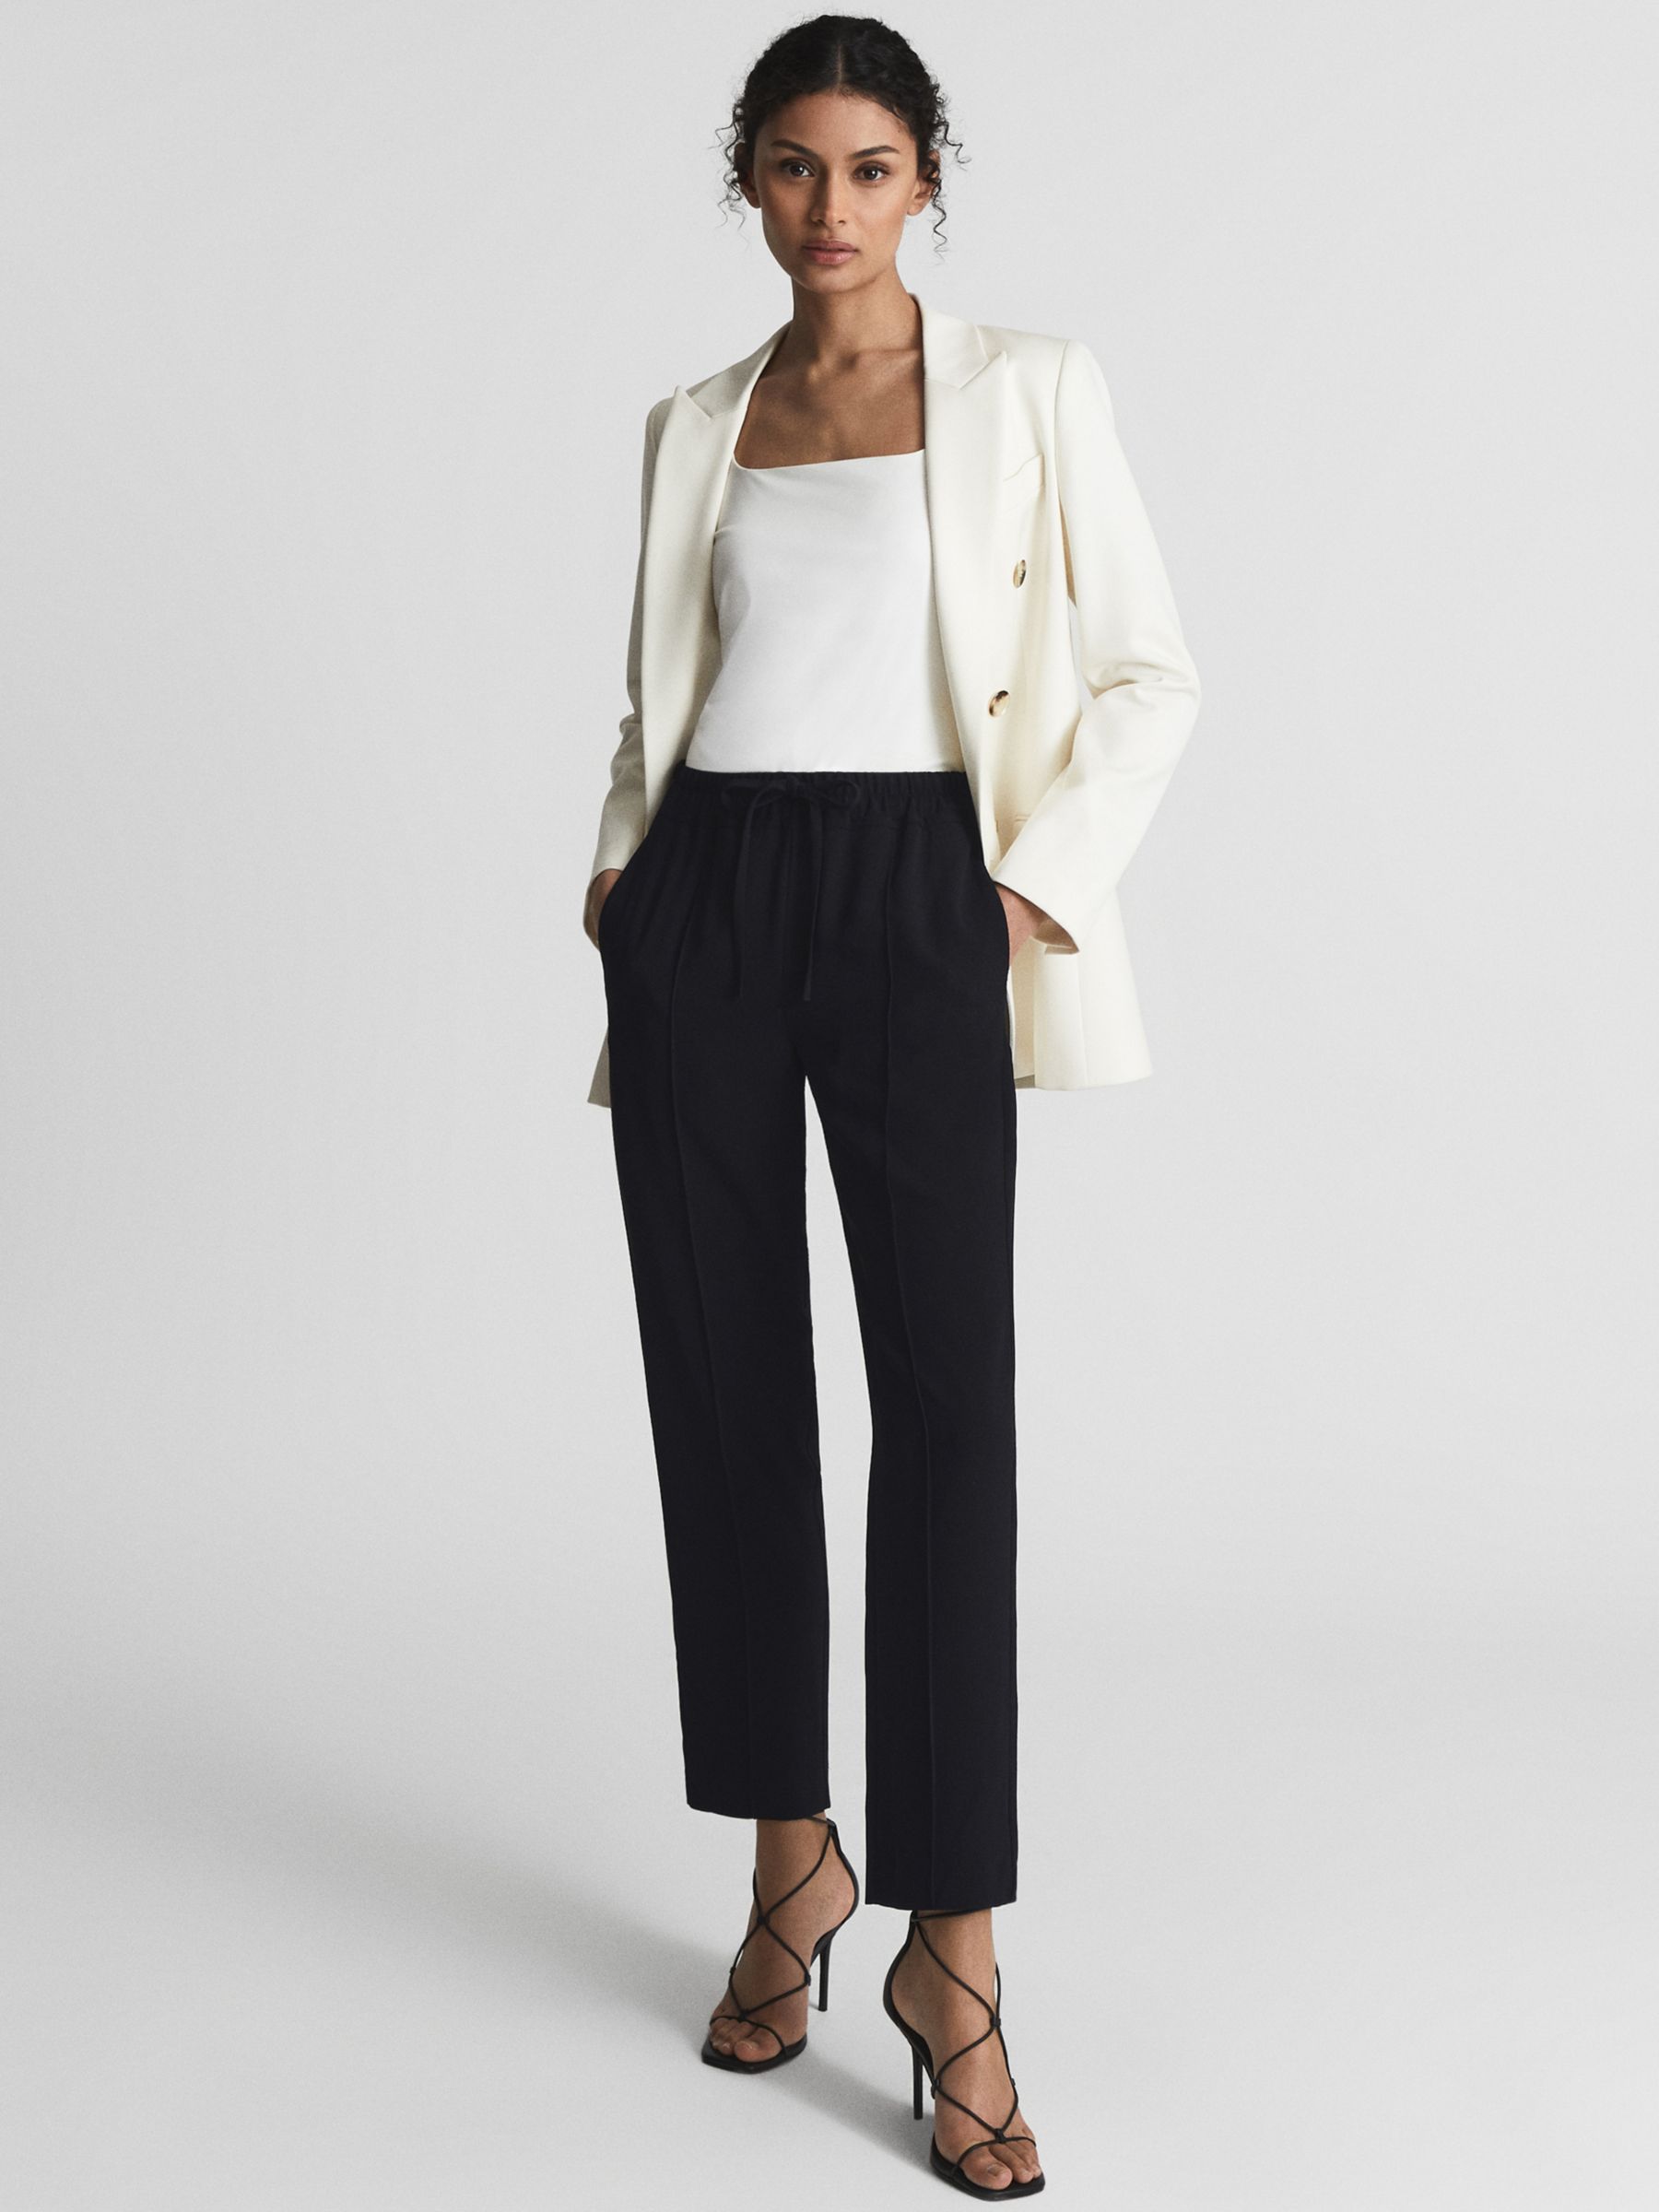 Reiss Petite Hailey Cropped Trousers, Black at John Lewis & Partners